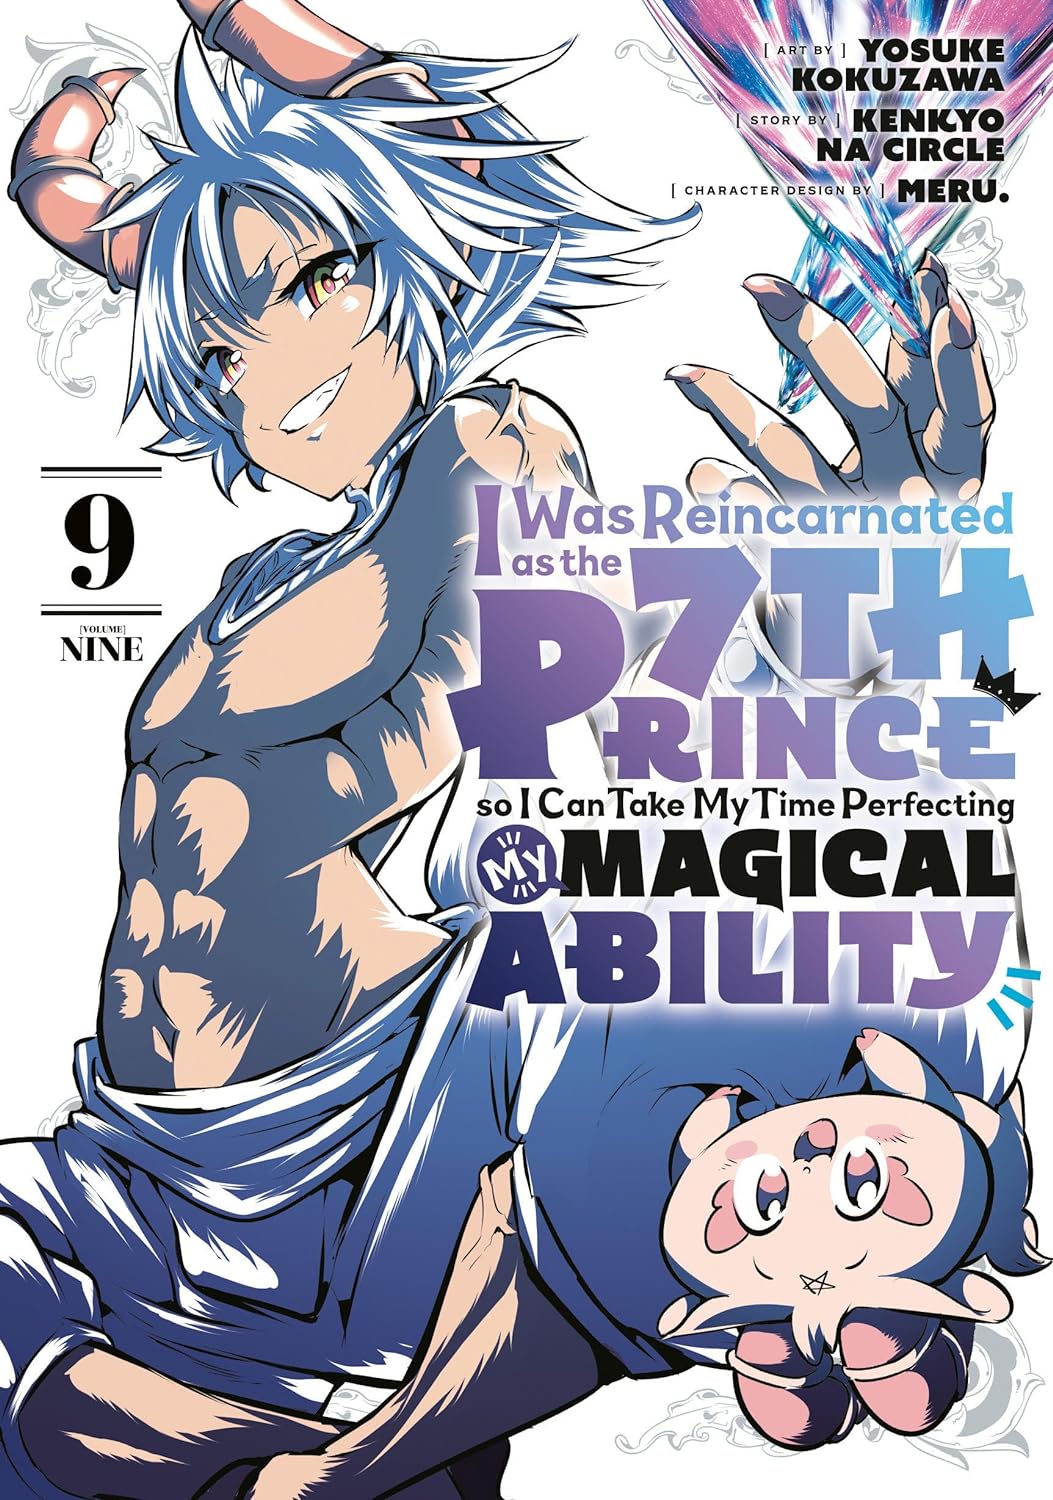 I Was Reincarnated as the 7th Prince so I Can Take My Time Perfecting My Magical Ability (Manga) Vol. 09